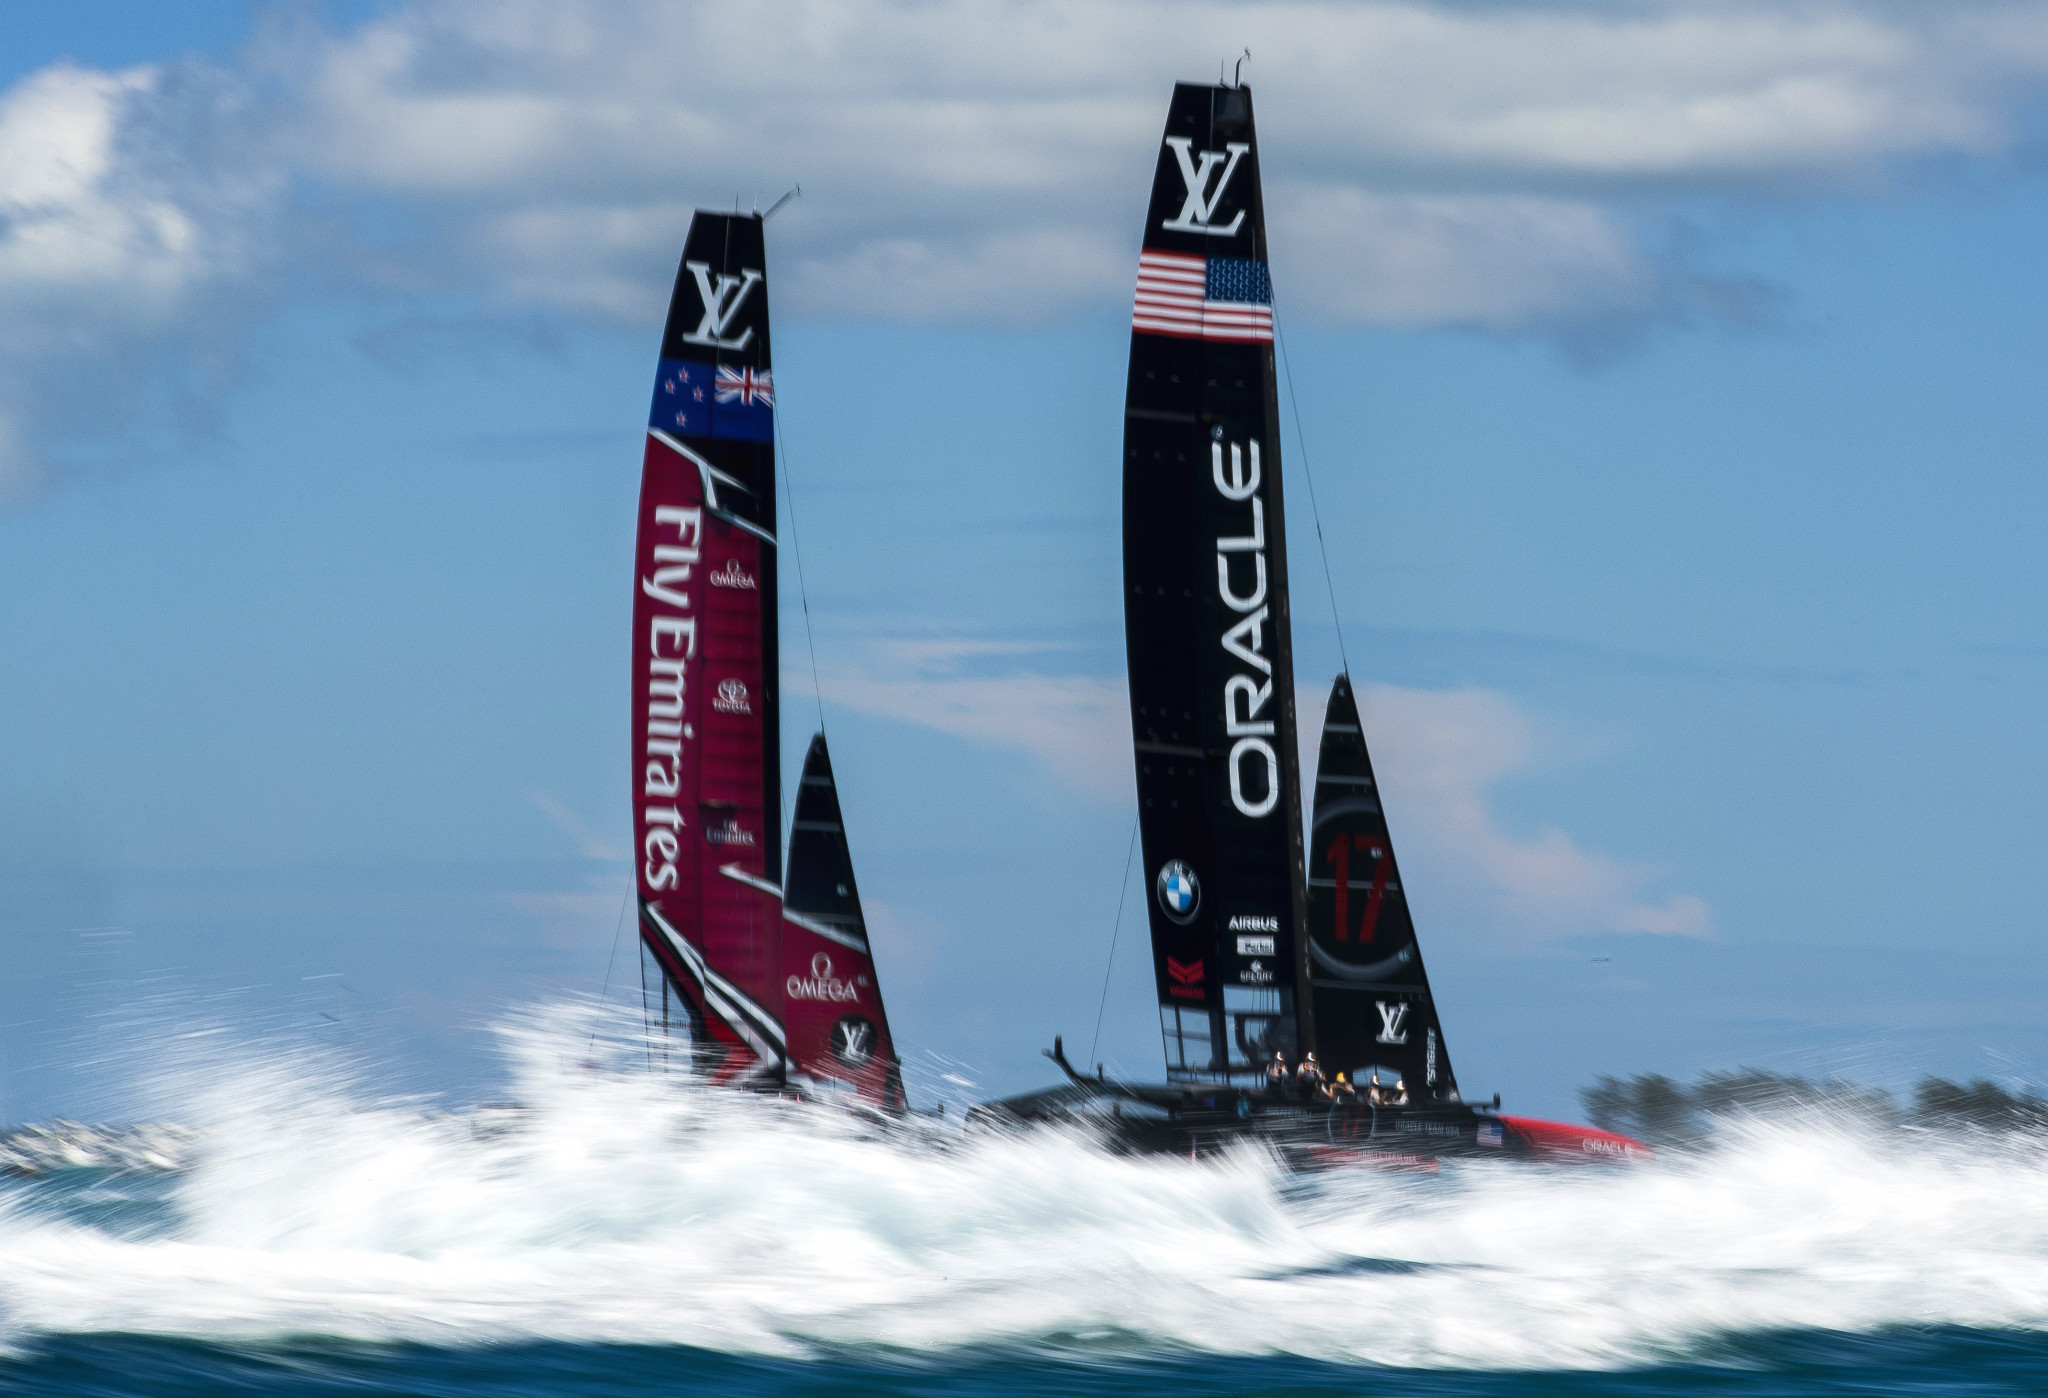 America's Cup is one of the most important sailing events in the world. © Getty Images